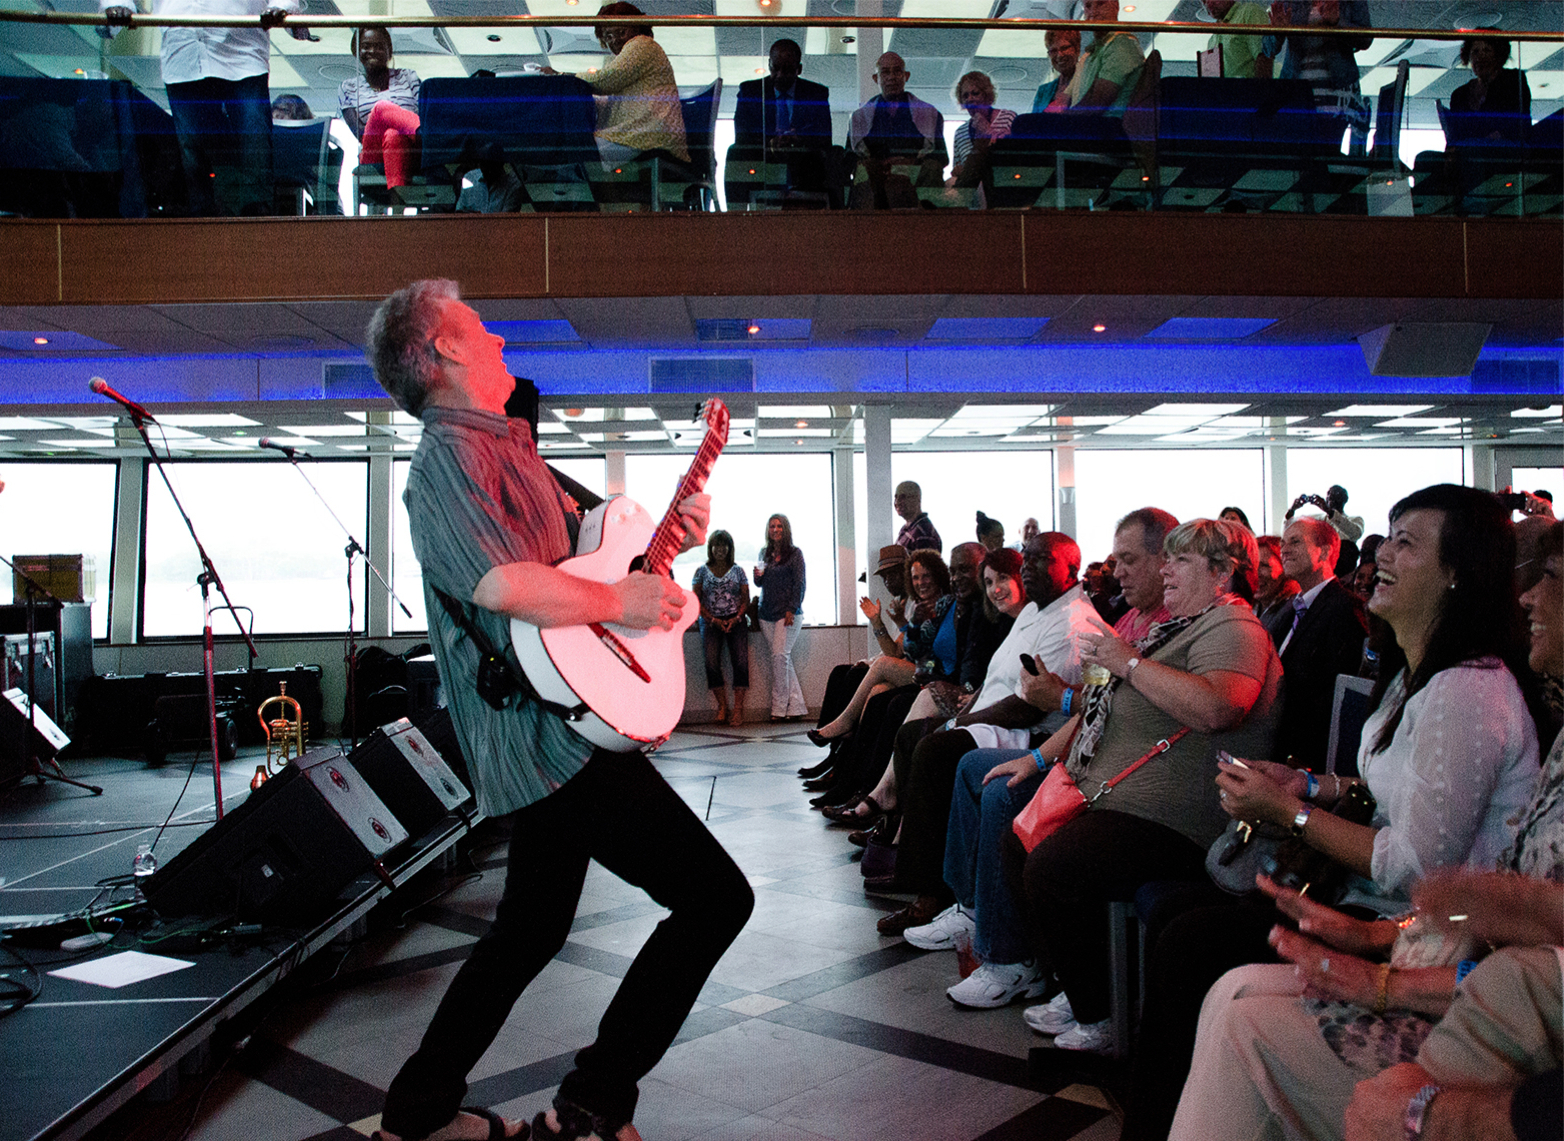 Acclaimed jazz guitarist Peter White performs with multi-instrumentalist Vincent Ingala Wed., Aug. 9 aboard the Smooth Cruise. 7pm, Hornblower Infinity, departing Pier 40, Houston St @ West Side Hwy.